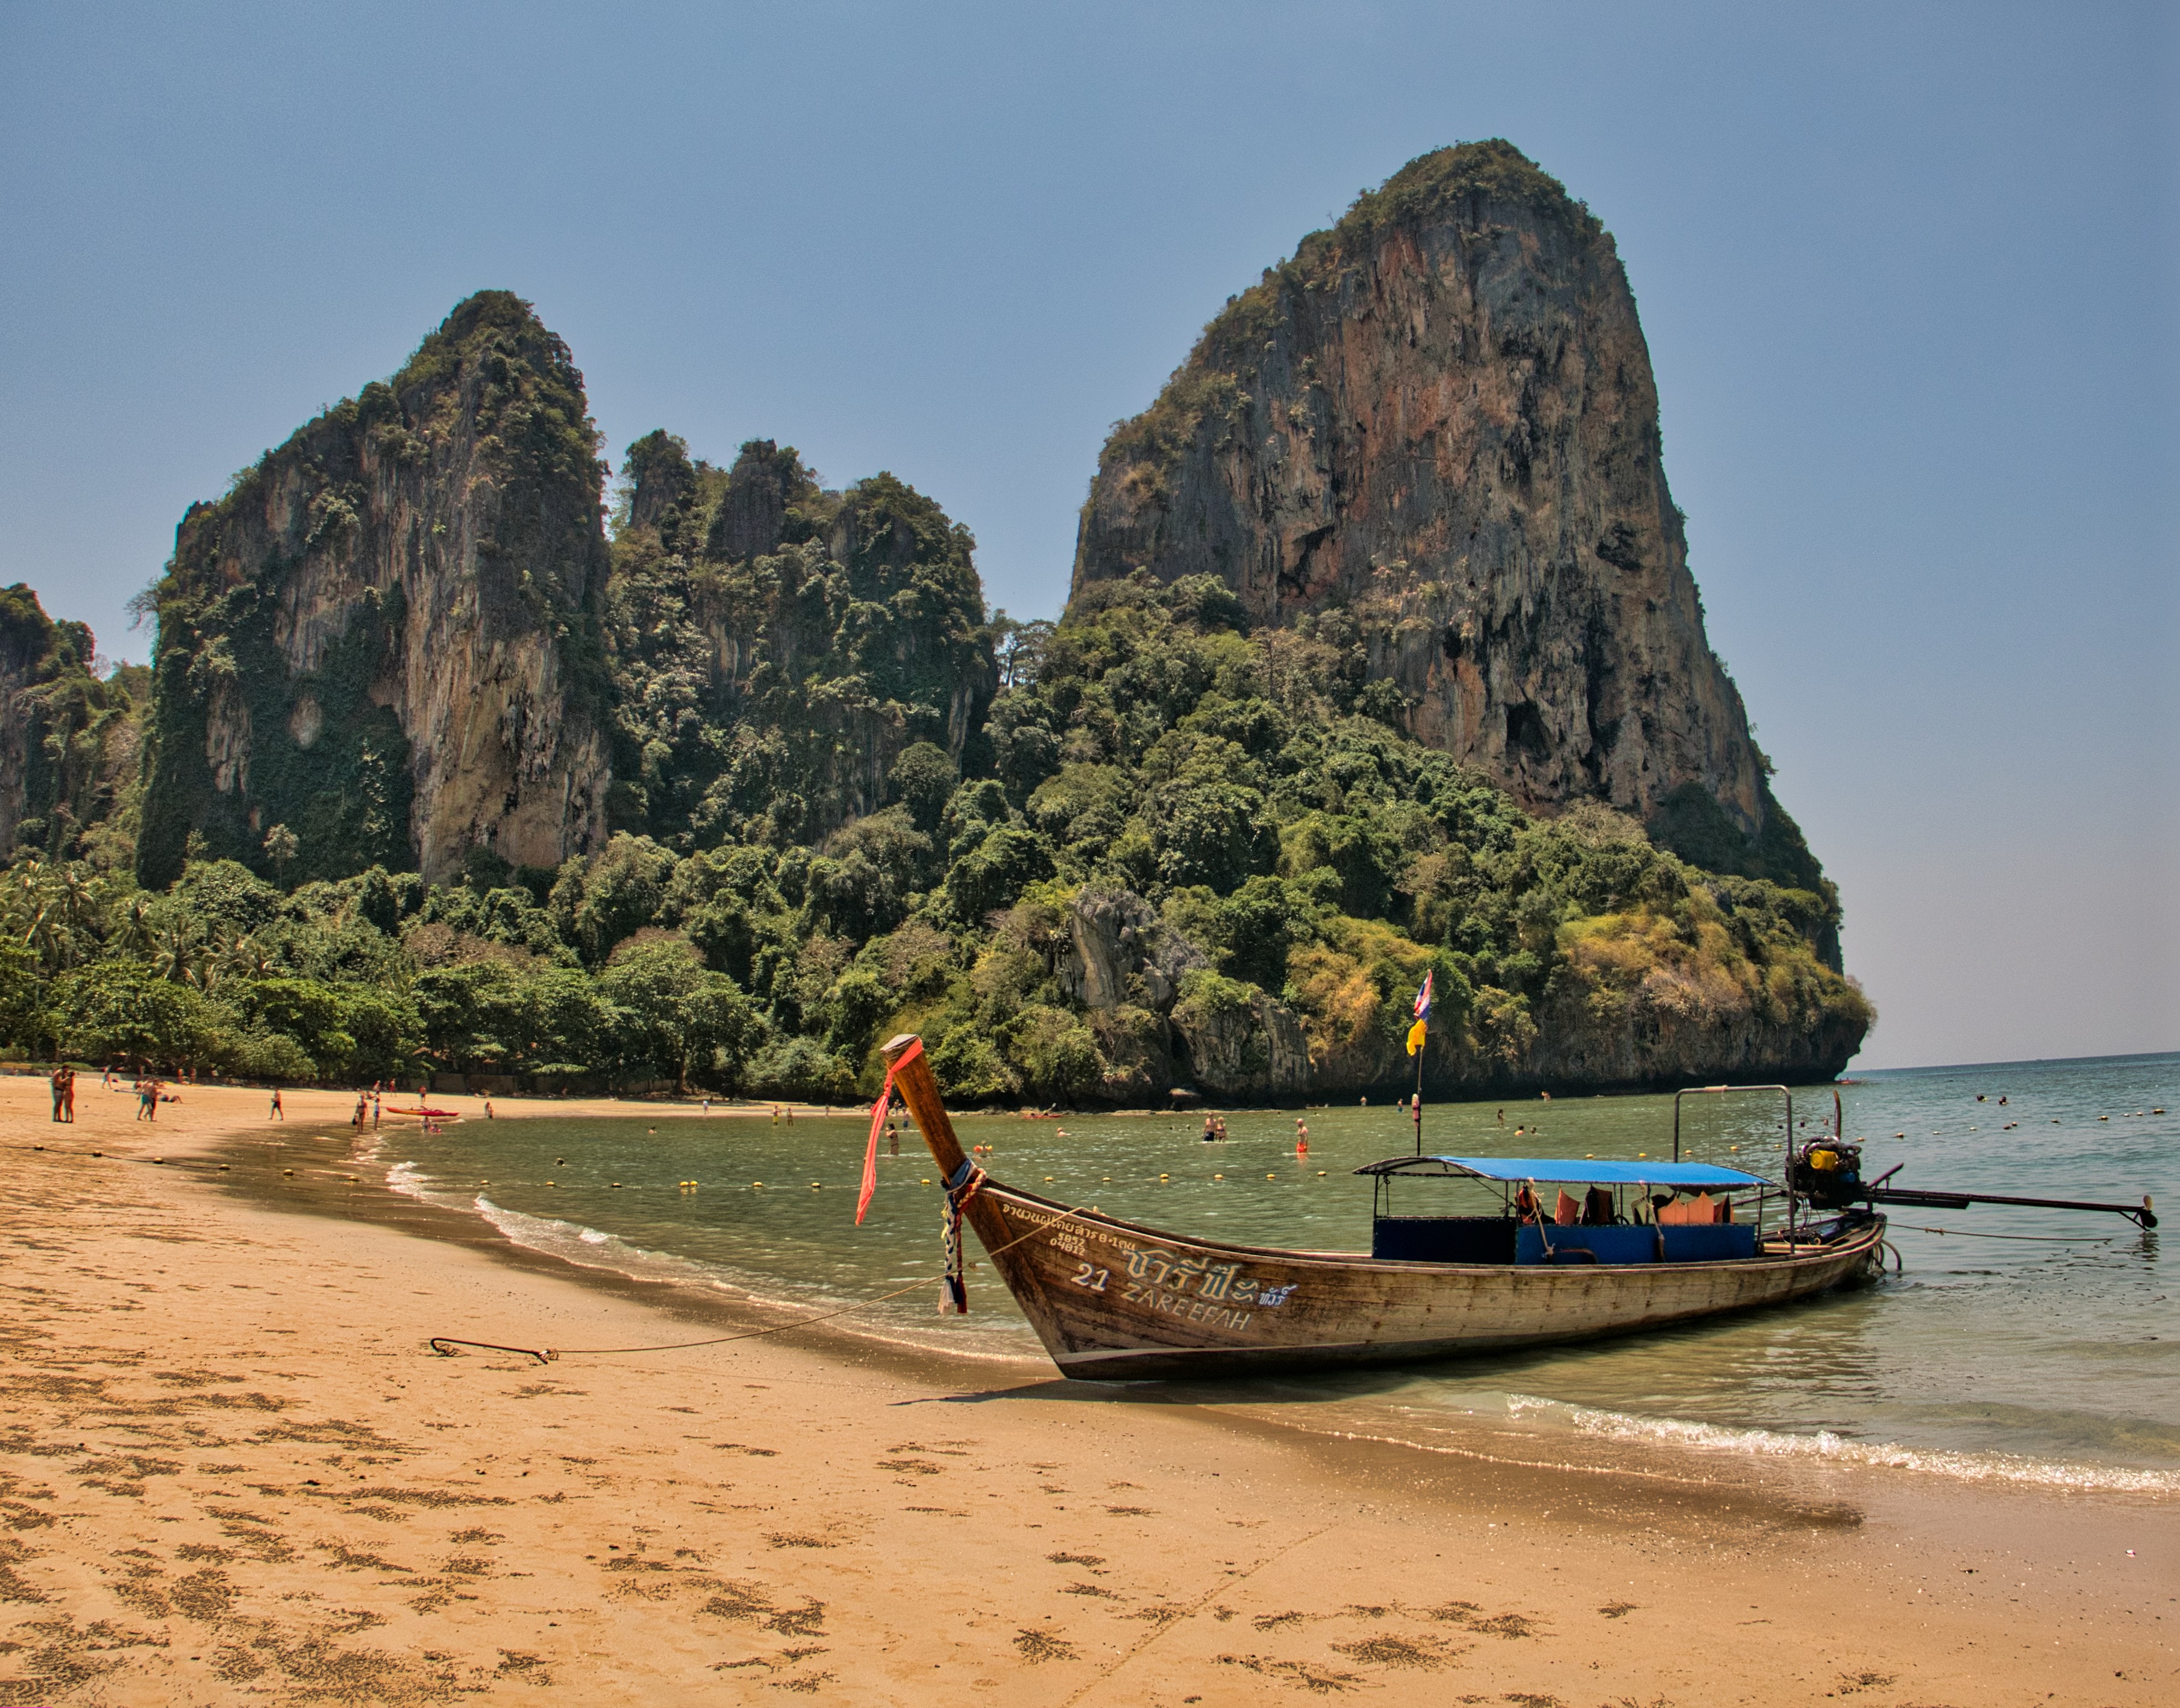 A boat on the beach with mountains in the background